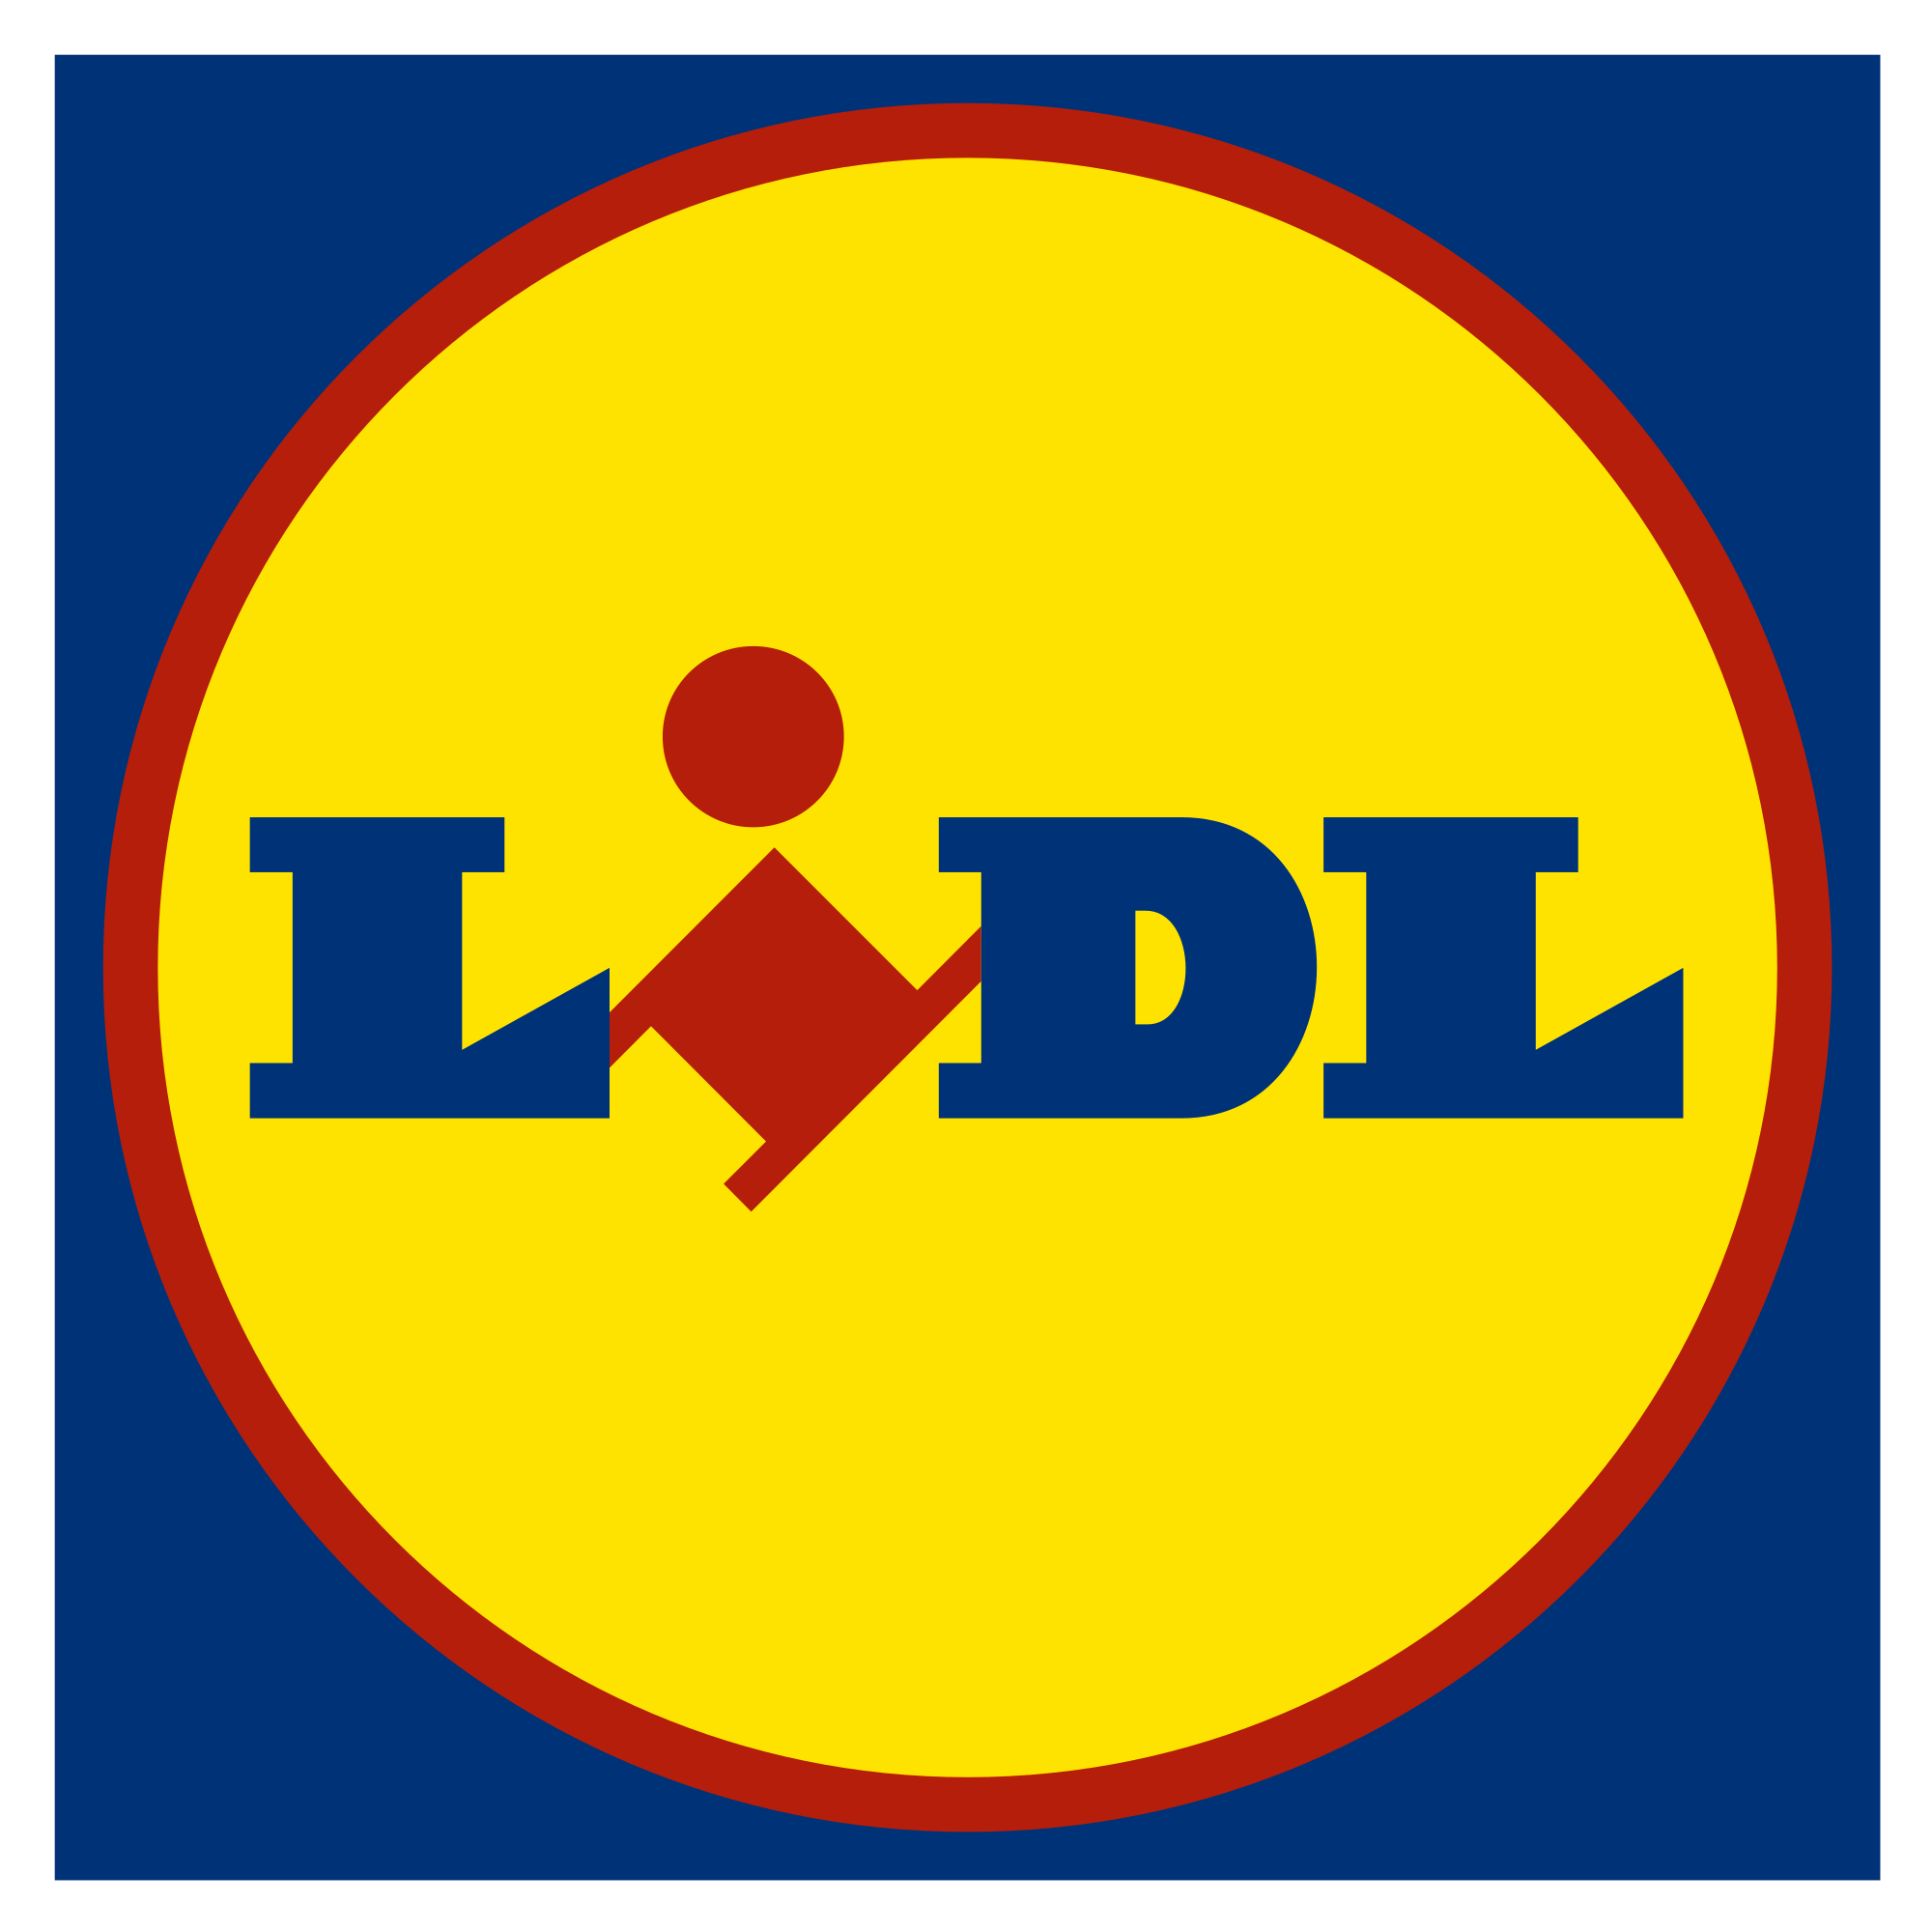 Investment in infrastructure and ambitious growth plans by Central Bedfordshire Council secures Lidl